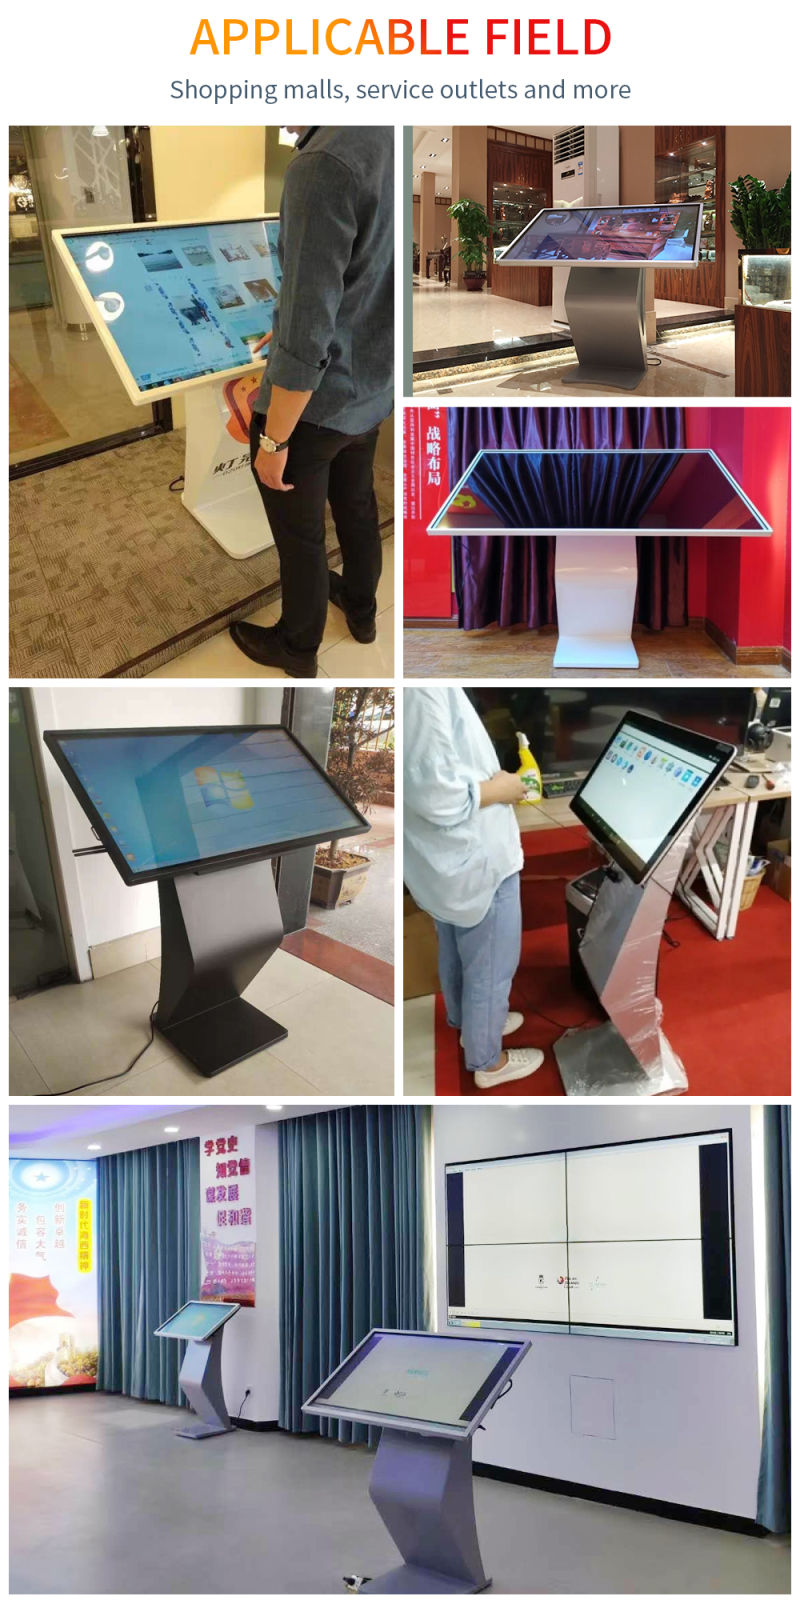 Aiyos Touch Screen Table Information Windows System Touch Screen Display Table Advertising Kiosk